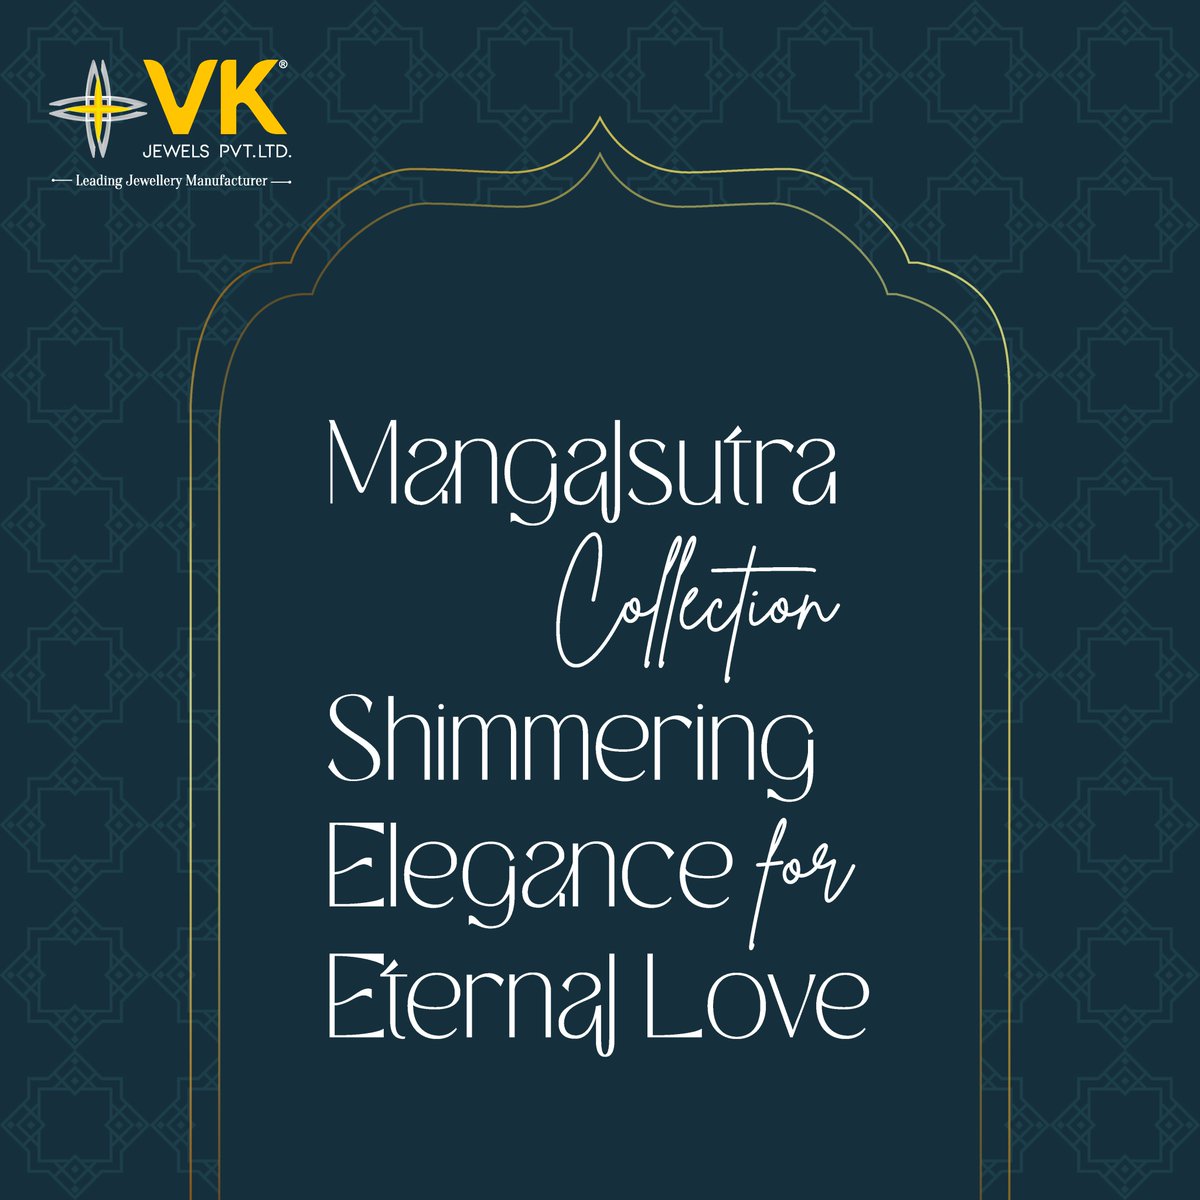 Discover the exquisite craftsmanship and timeless allure of our Mangalsutra Collection.

The artistry brilliance that captivates hearts!

#Mangalsutra #mangalsutradesign #mangalsutracollection #wedding #bride #rituals #neckalce #accessories #ring #style #VK #vkjewels #India